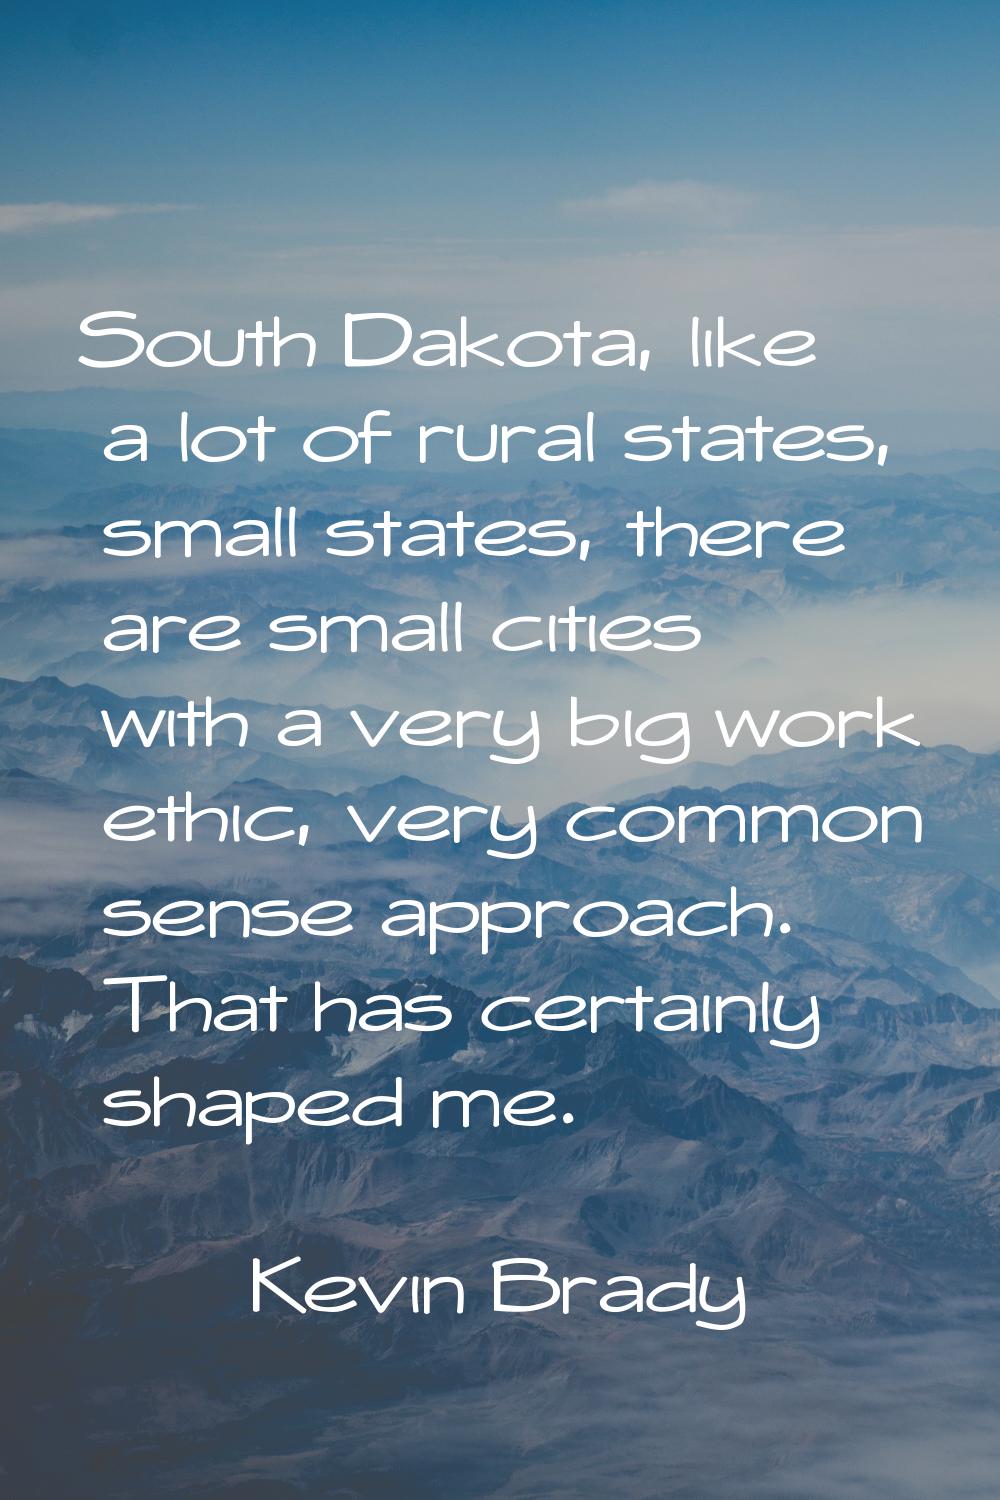 South Dakota, like a lot of rural states, small states, there are small cities with a very big work